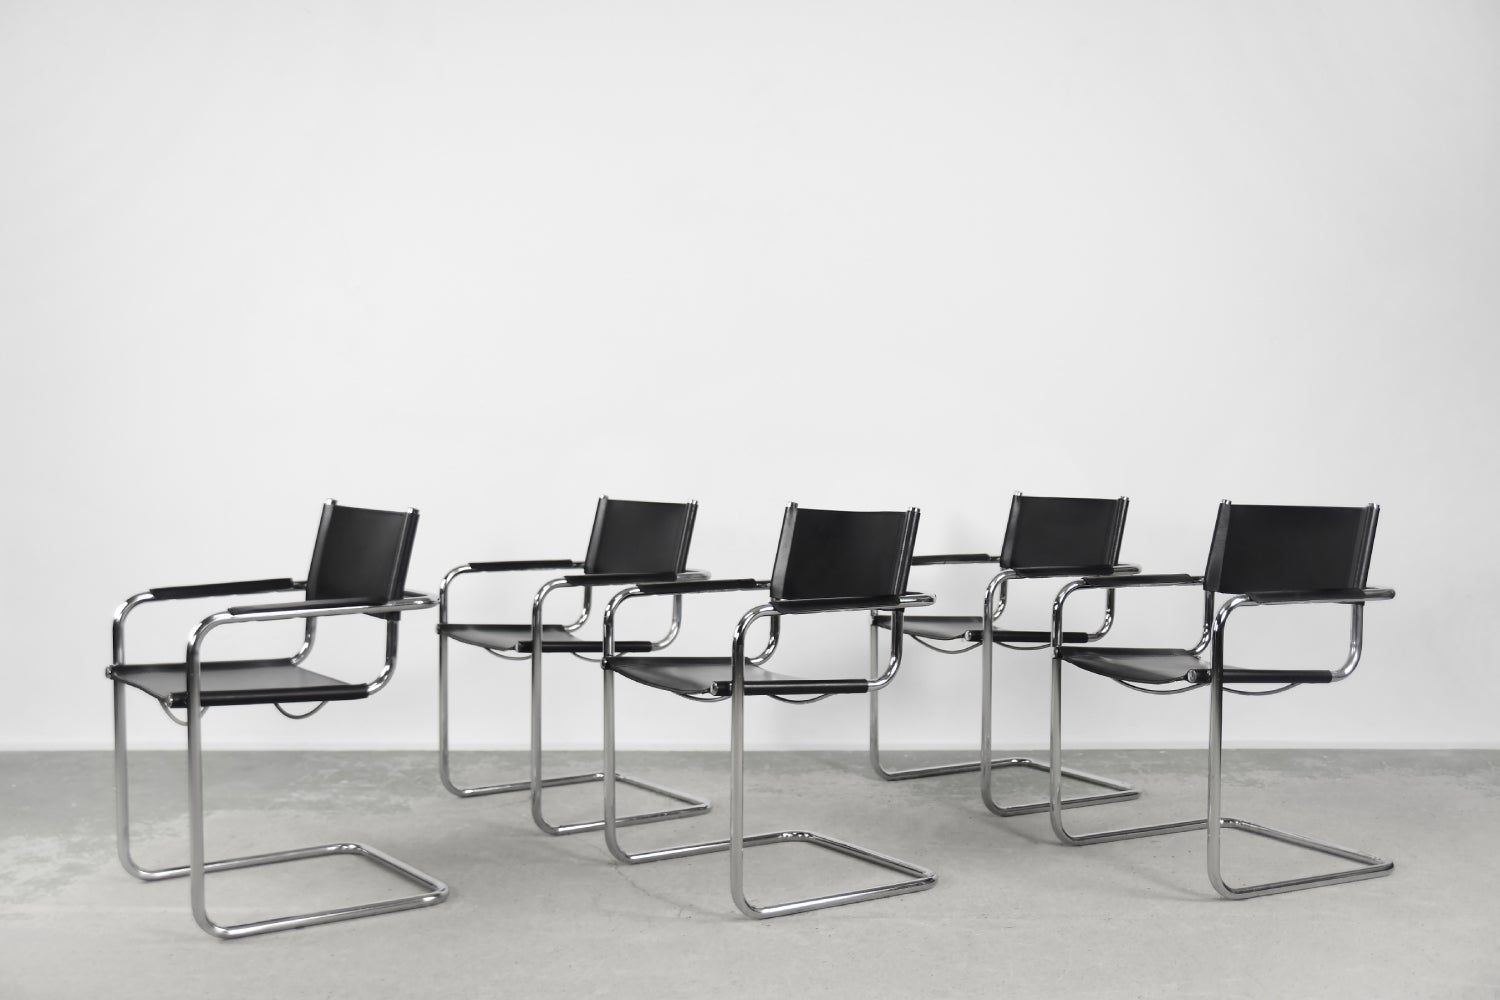 This set of five cantilever chairs was manufactured in Germany during the 1960s. This chairs are made of tubular steel and black natural leather. The cubic form, clear design, and subtle proportions allude to the design of the Bauhaus school, where